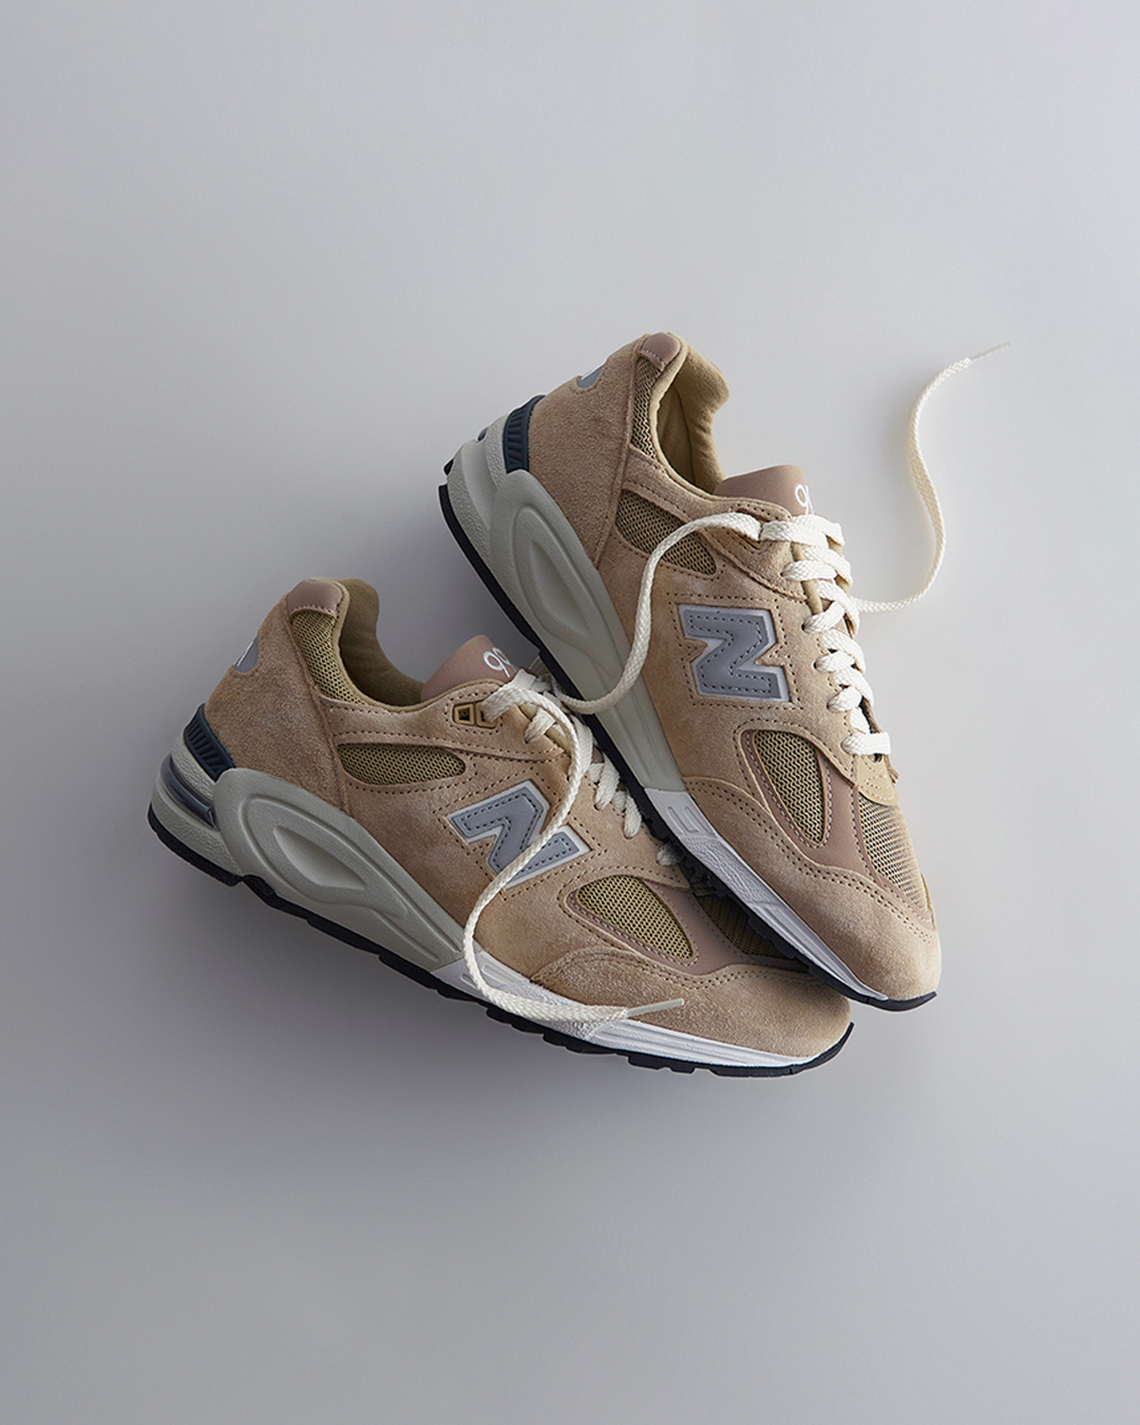 Kith Stone Island and New Balance are expanding their partnership with two new Tan 4